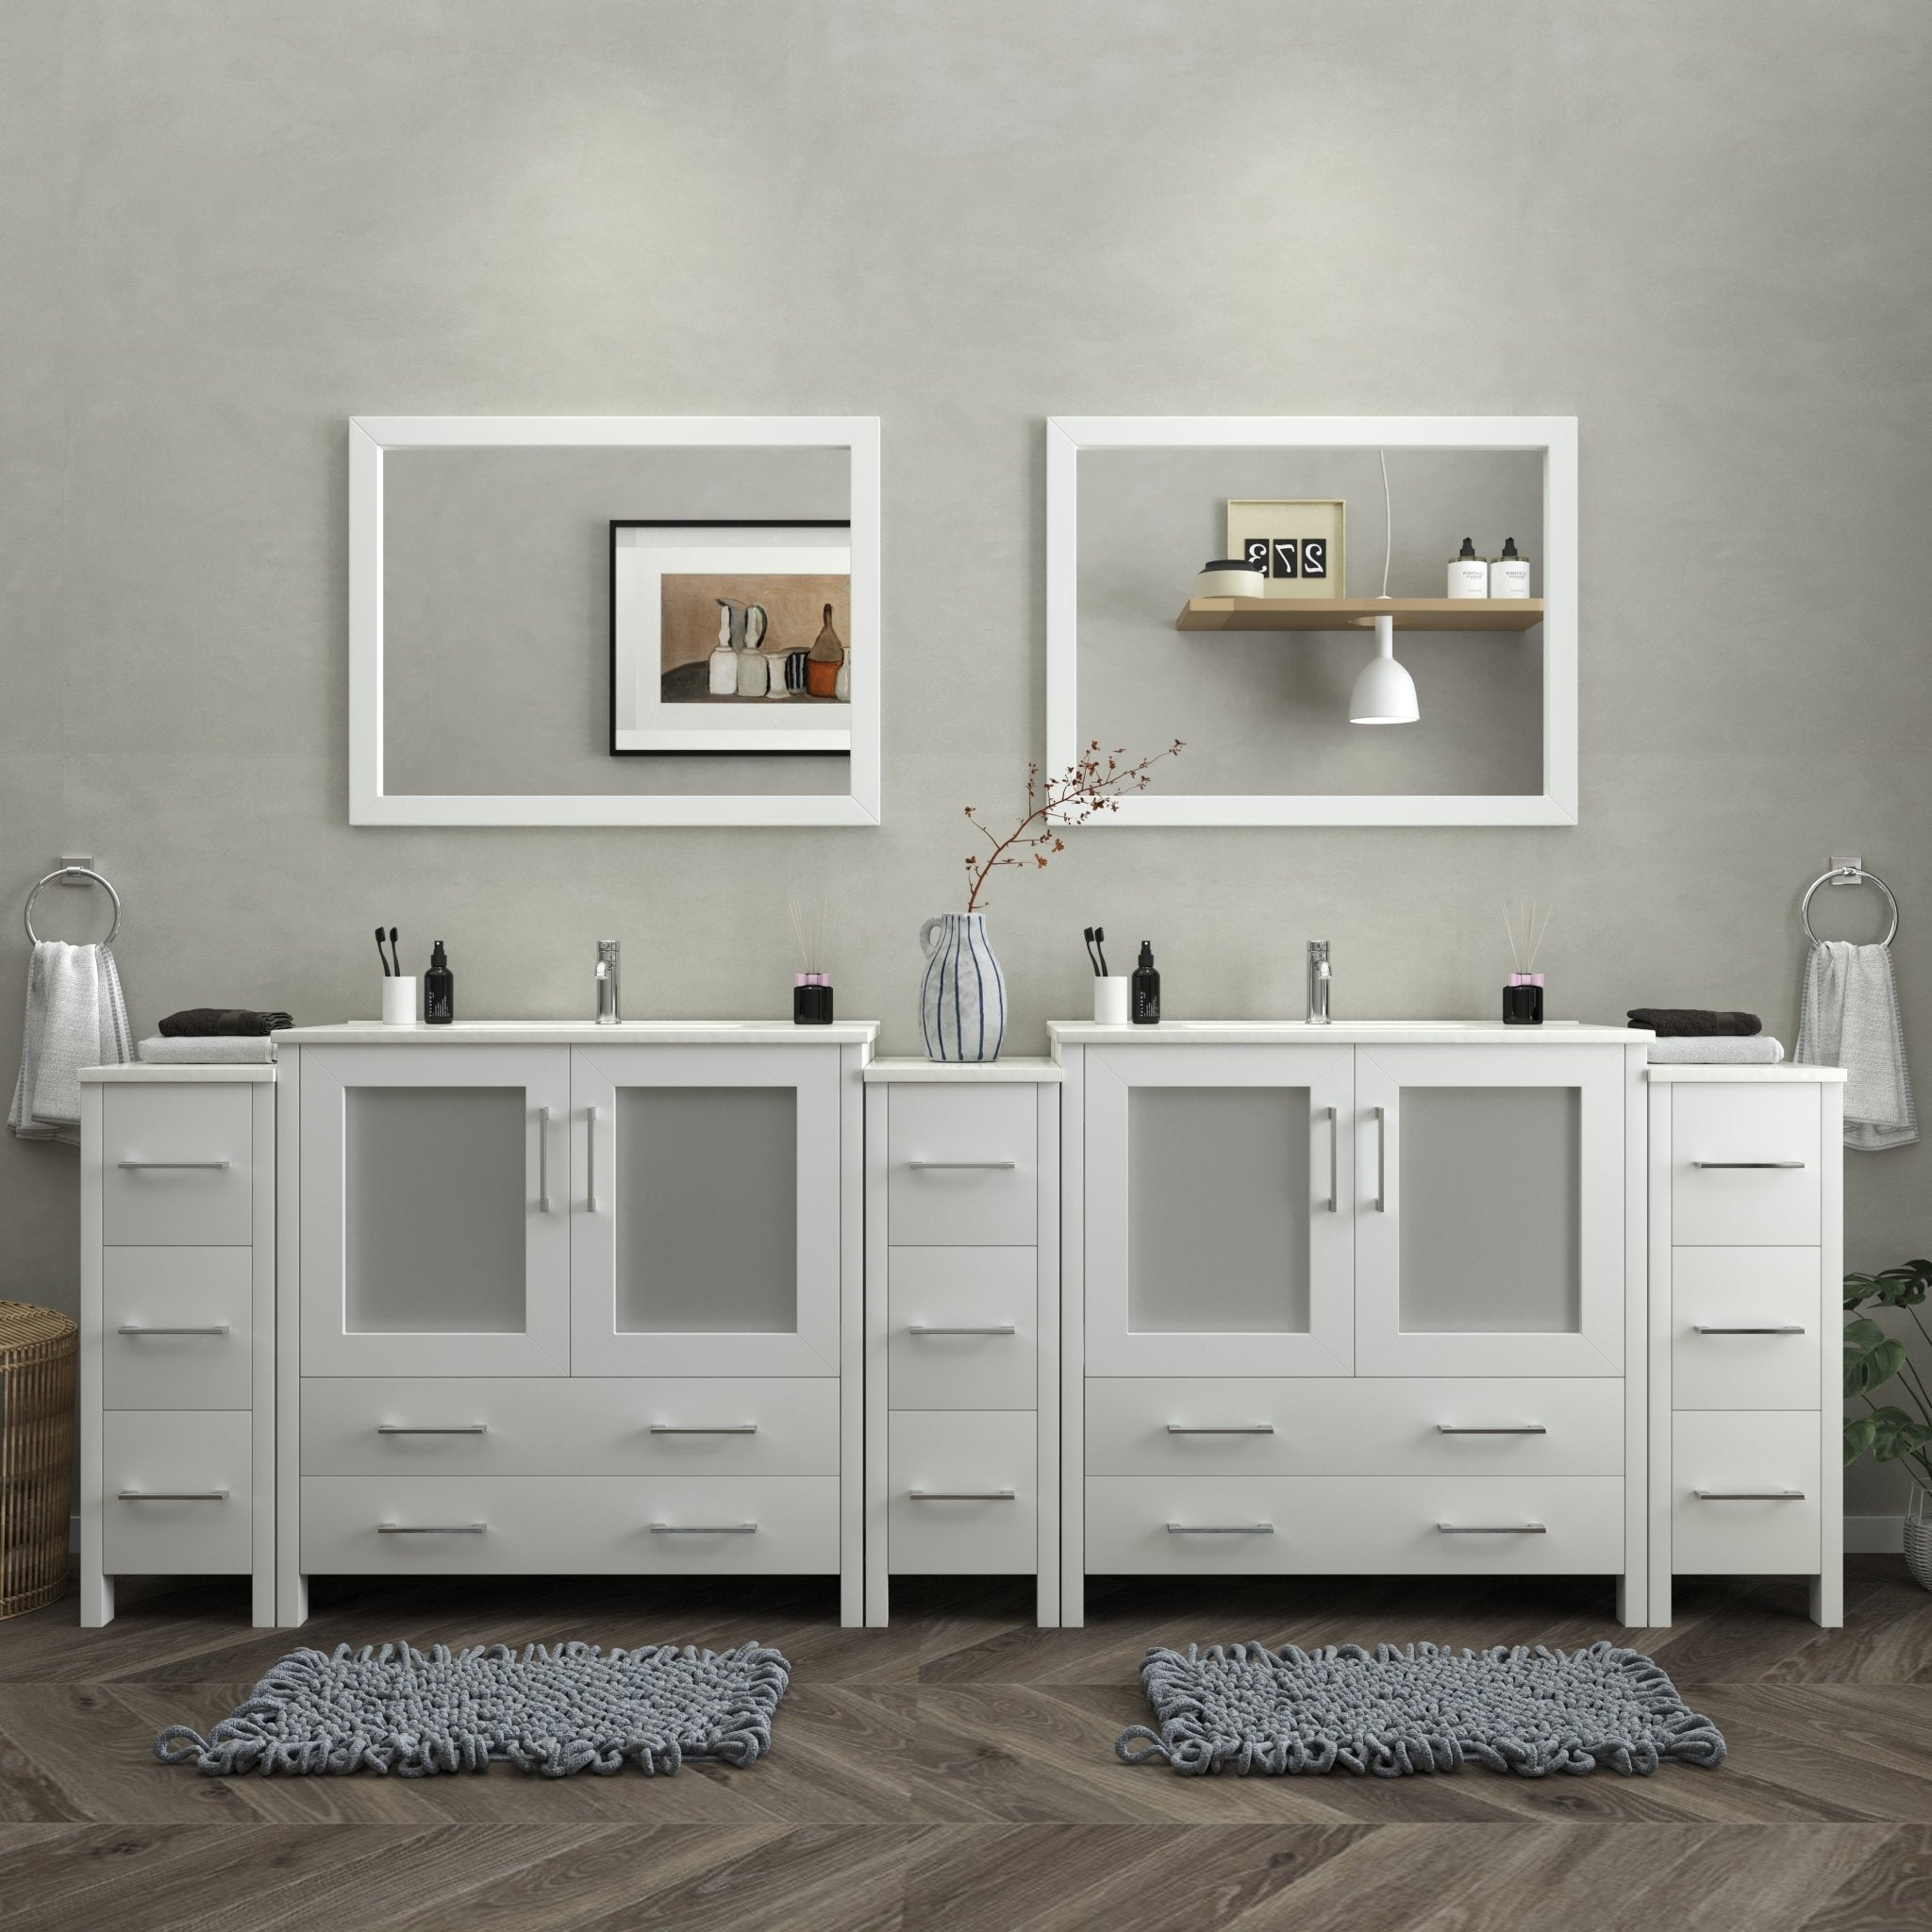 Vanity Art - London 108" Double Sink Bathroom Vanity Set with Sink and Mirrors - 3 Side Cabinets - Bhdepot 